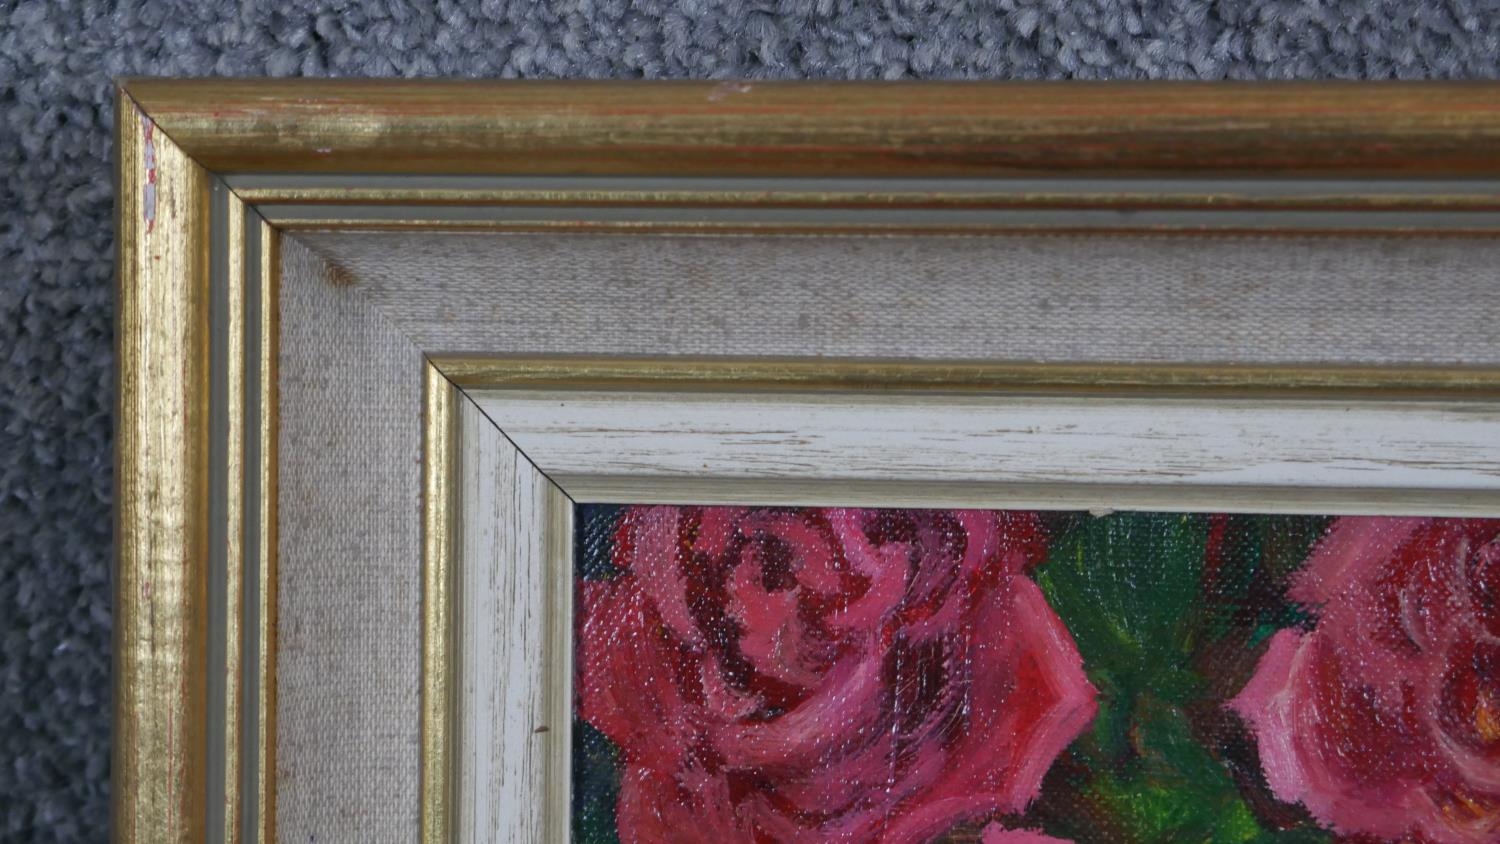 Gerry B Gibbs (b. 1969). A framed oil on board of a still life. Signed Gibbs, dated 1970. H.65 W. - Image 4 of 5